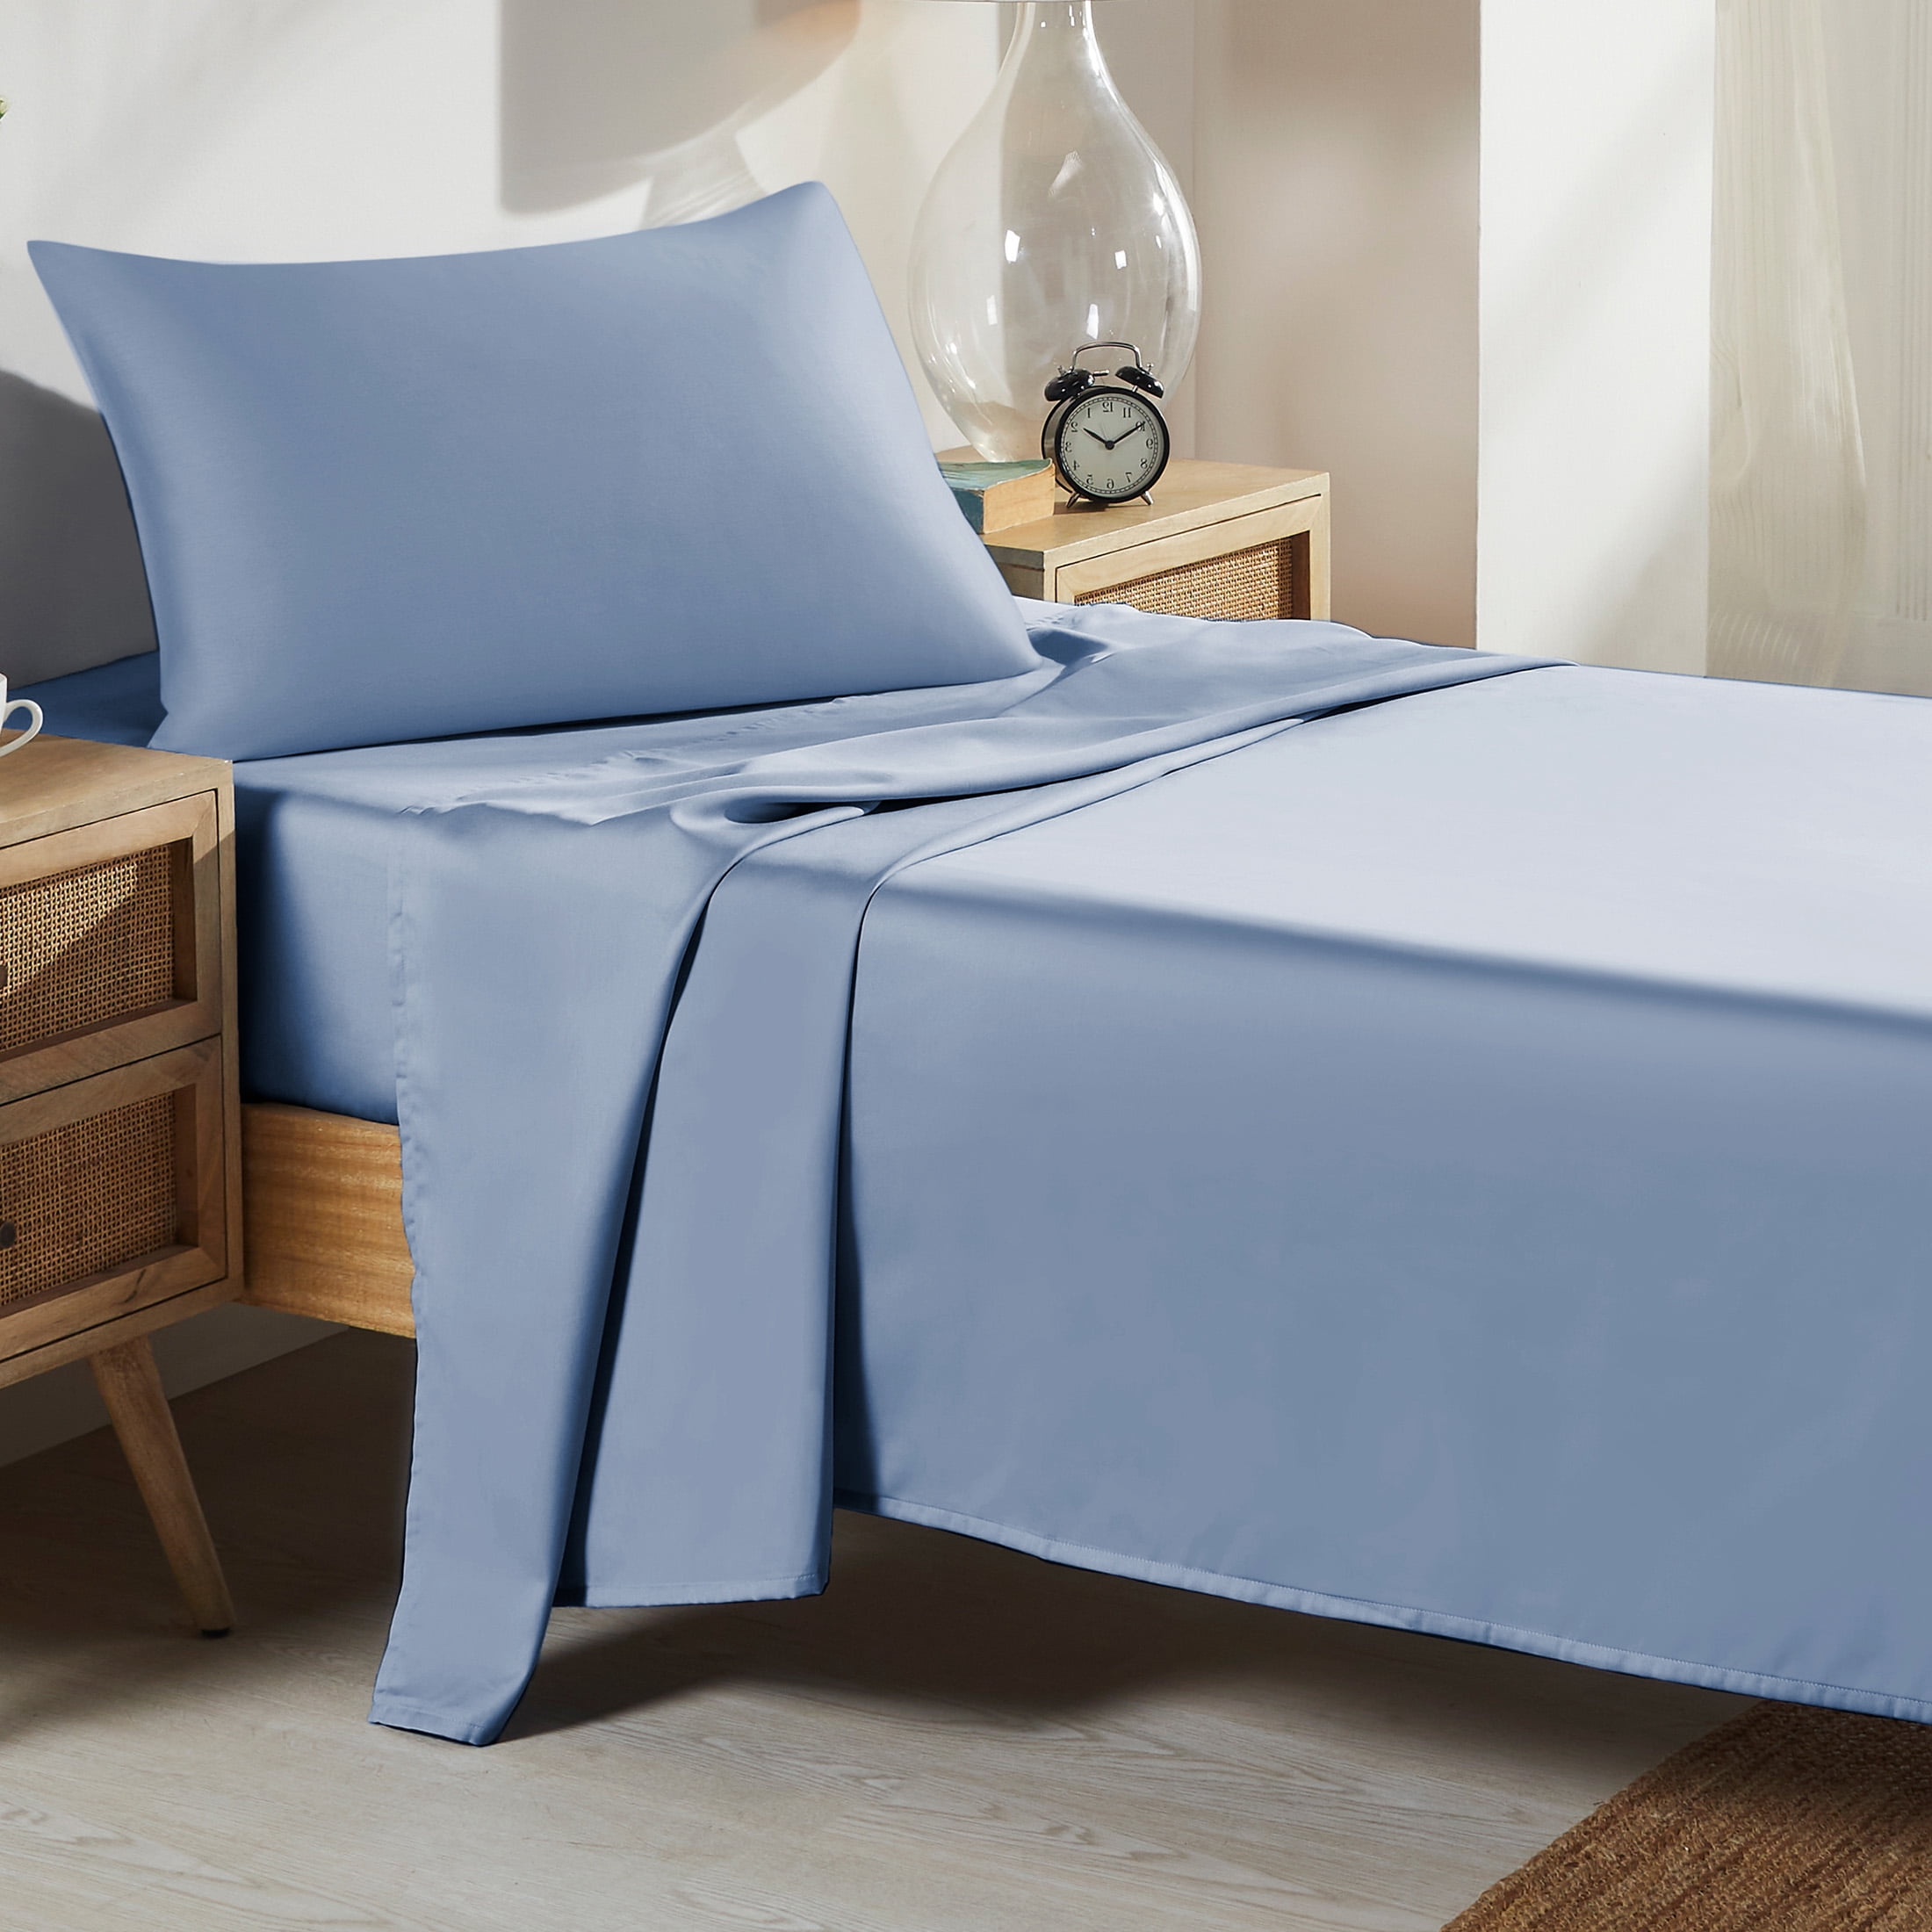 Twin XL Fitted Sheet Dimensions (Guide & Insights) – California Design Den